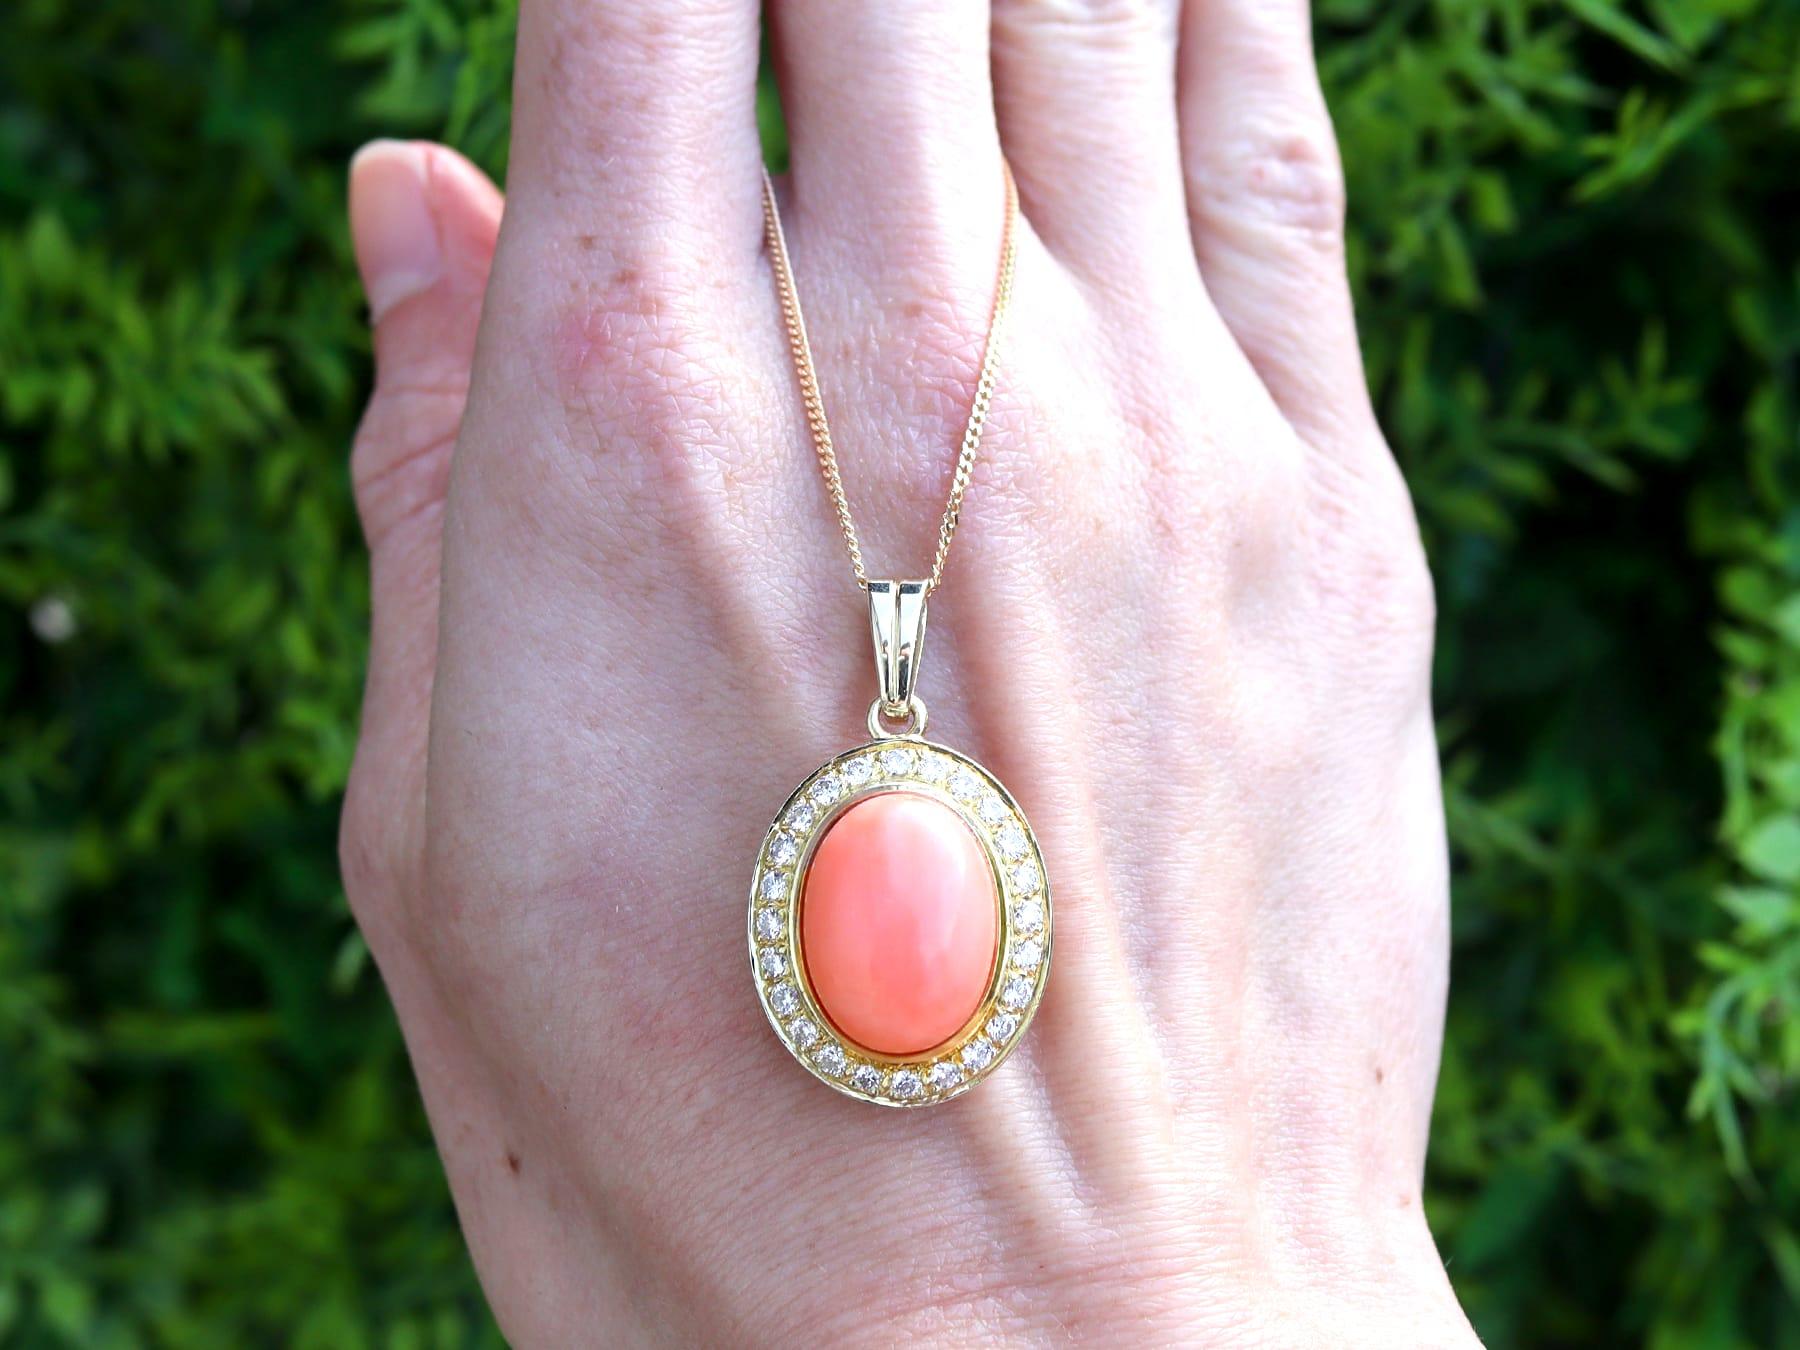 A fine and impressive vintage 9.27 carat coral and 0.80 carat diamond, 18 karat yellow gold pendant; part of our diverse vintage jewellery and estate jewelry collections.

This fine and impressive vintage pendant has been crafted in 18k yellow